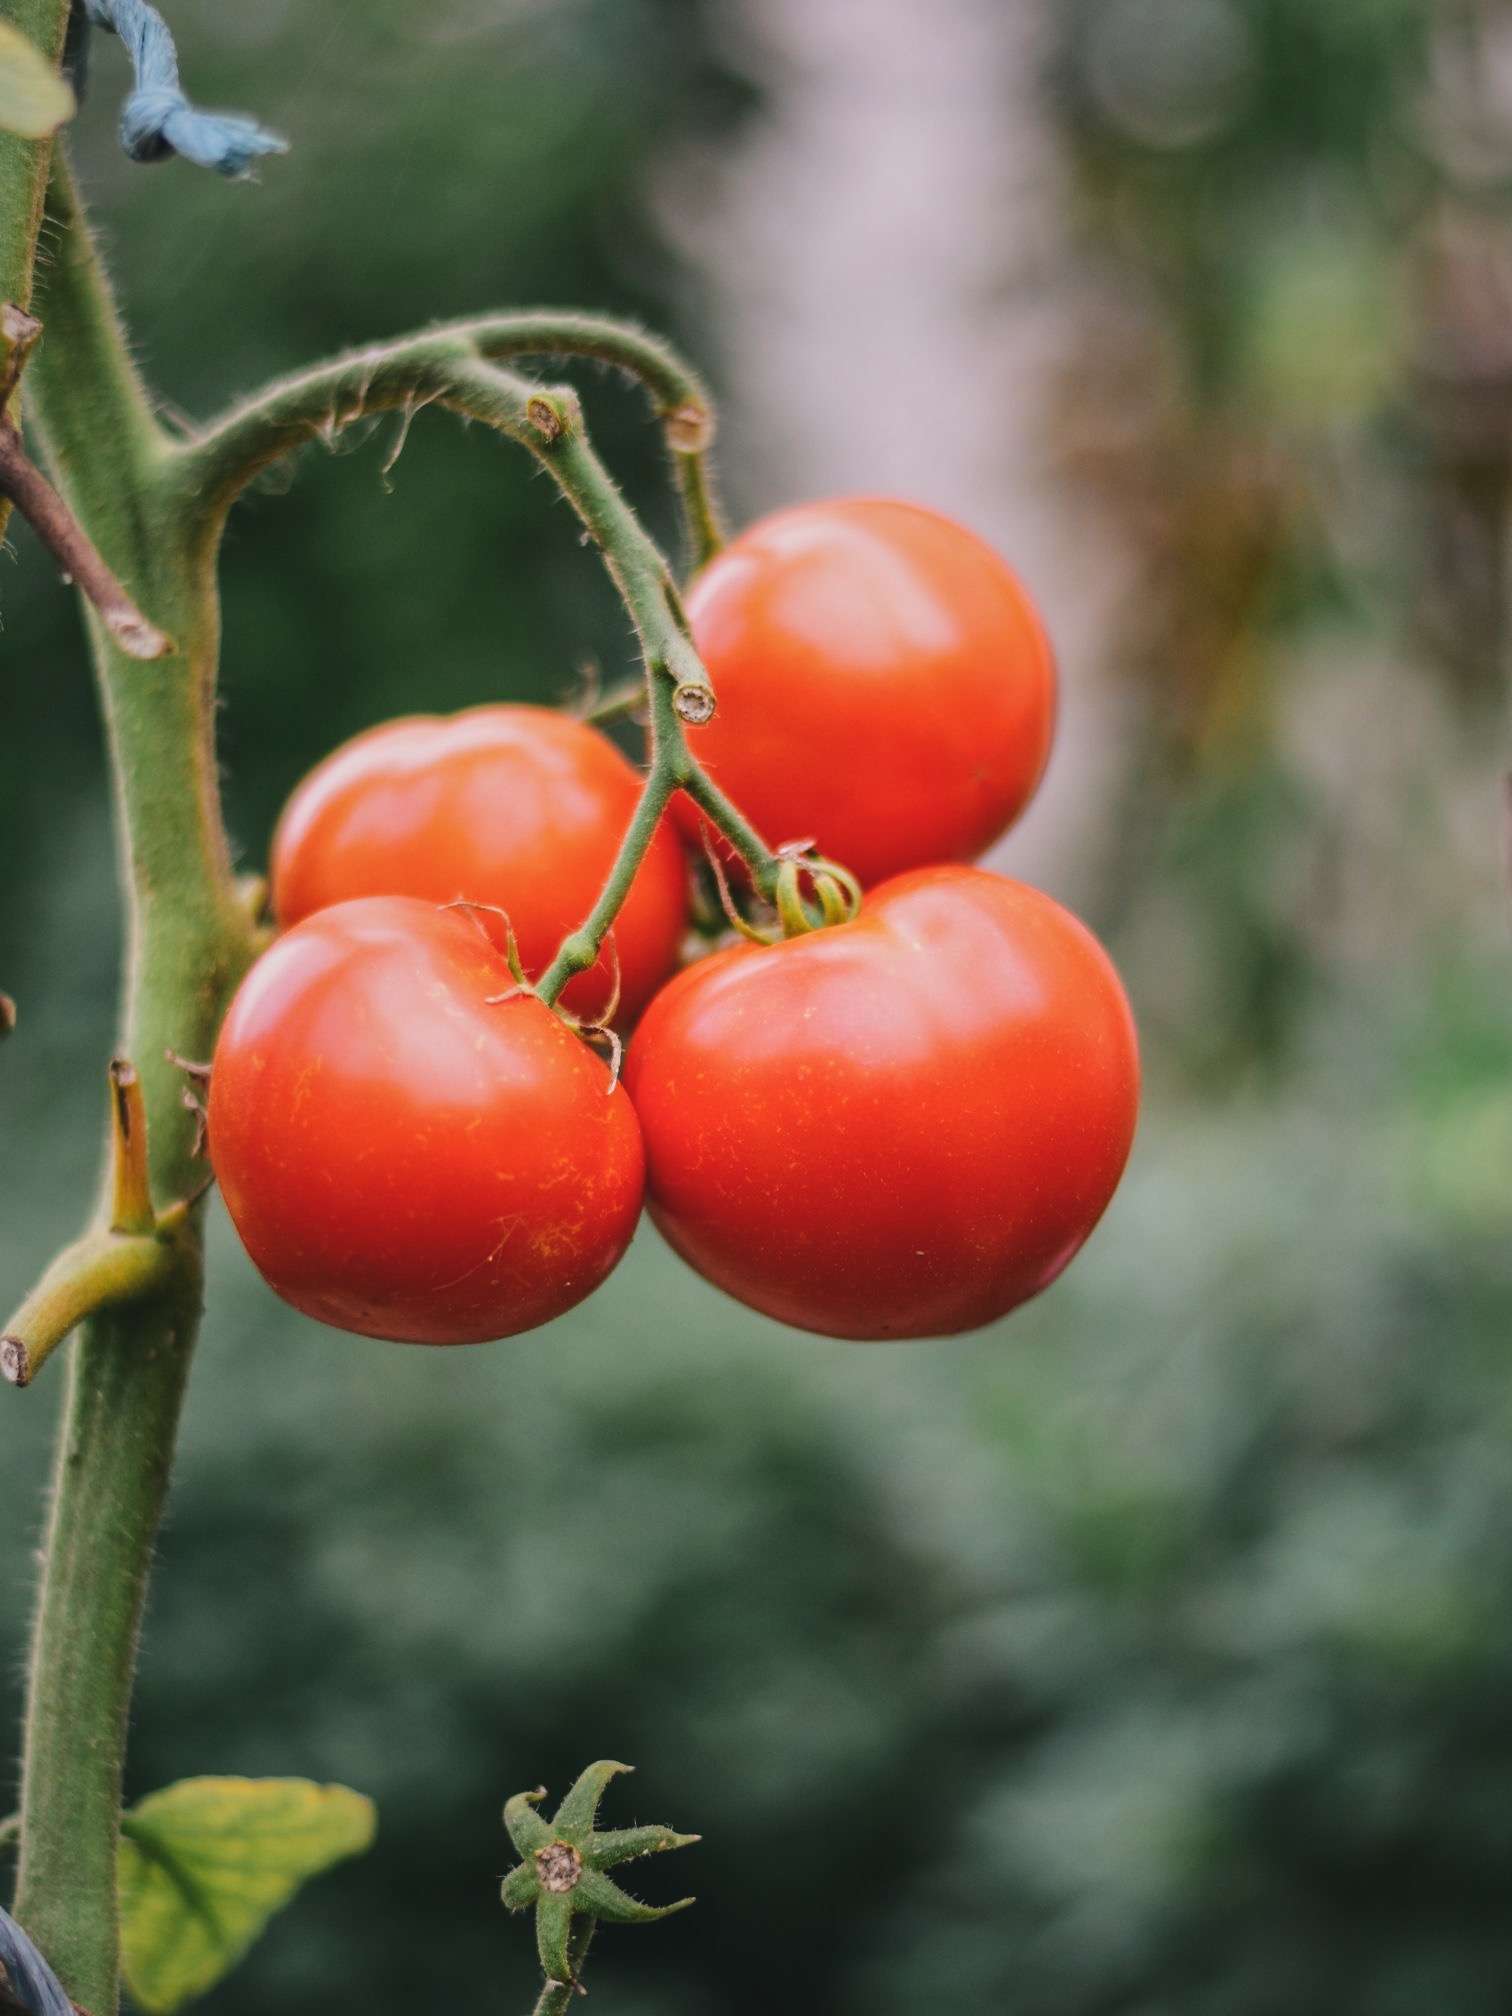 A close up photo of a cluster of tomatoes that are prime picking for deer